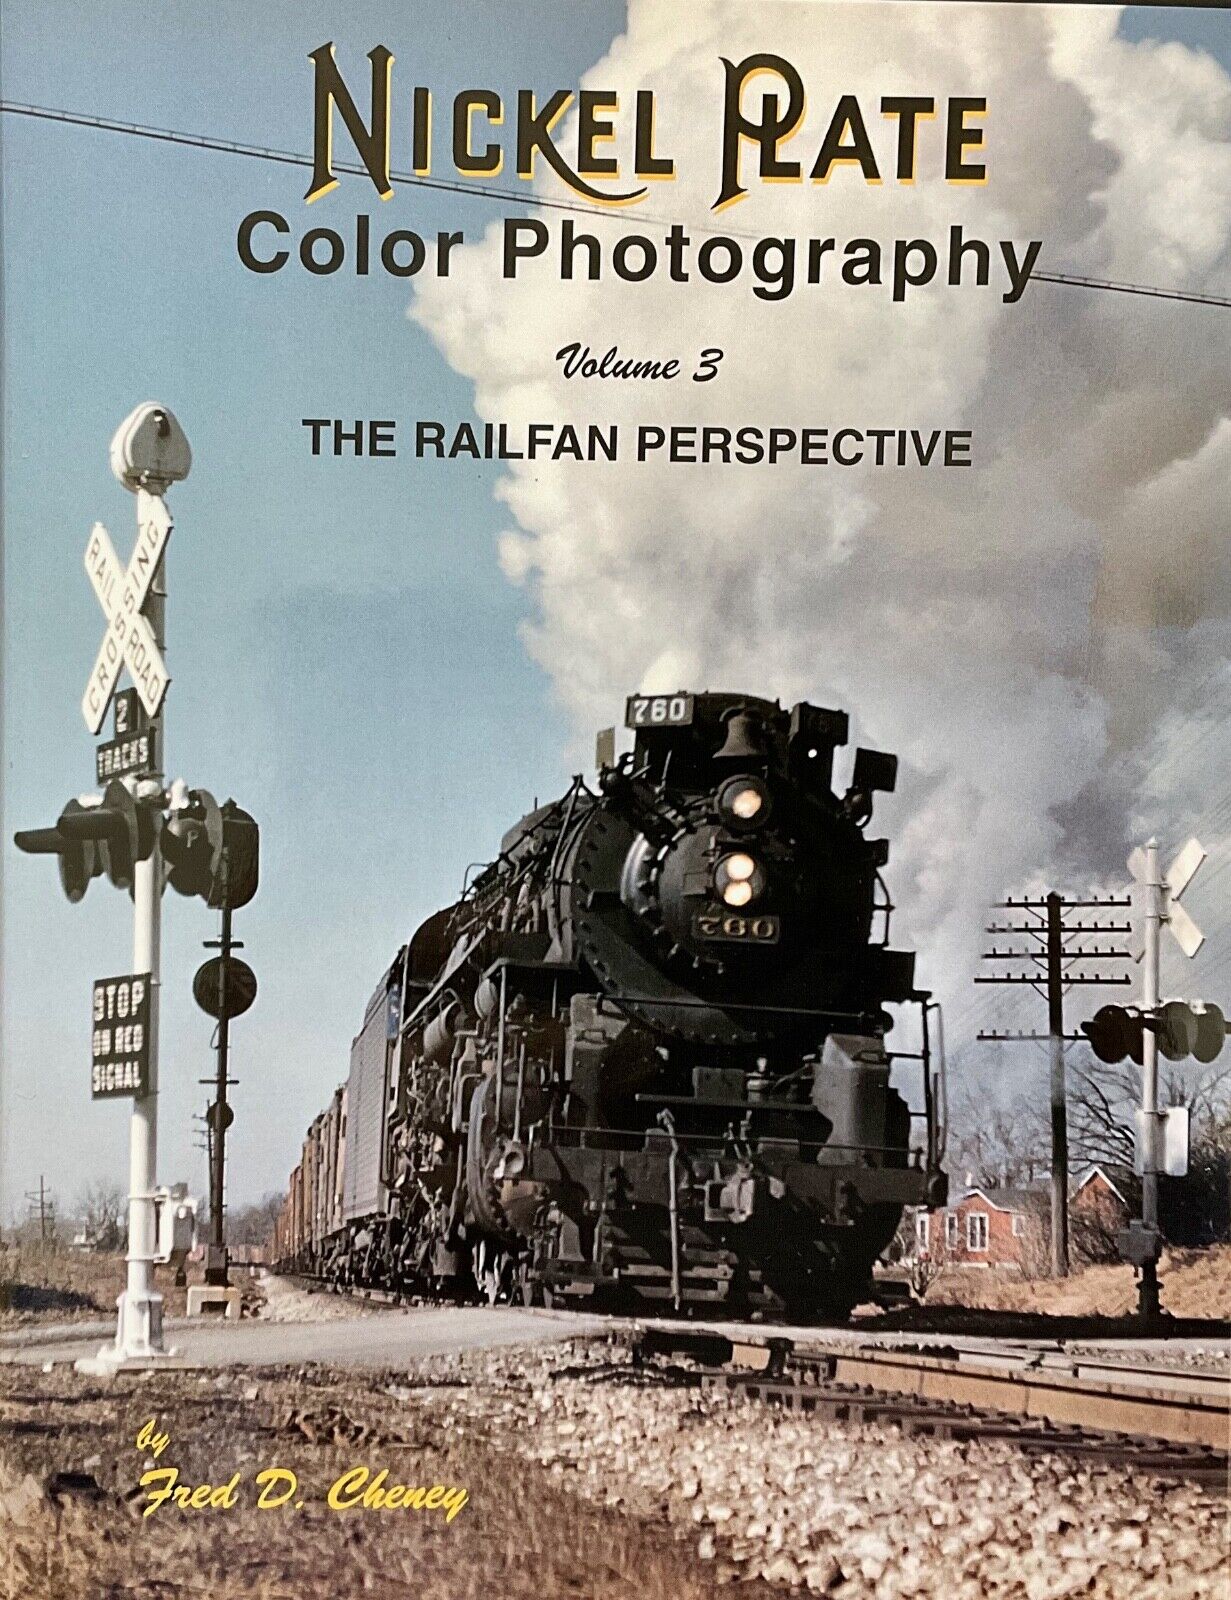 Nickel Plate Color Photography Vol 3 by Fred D. Cheney